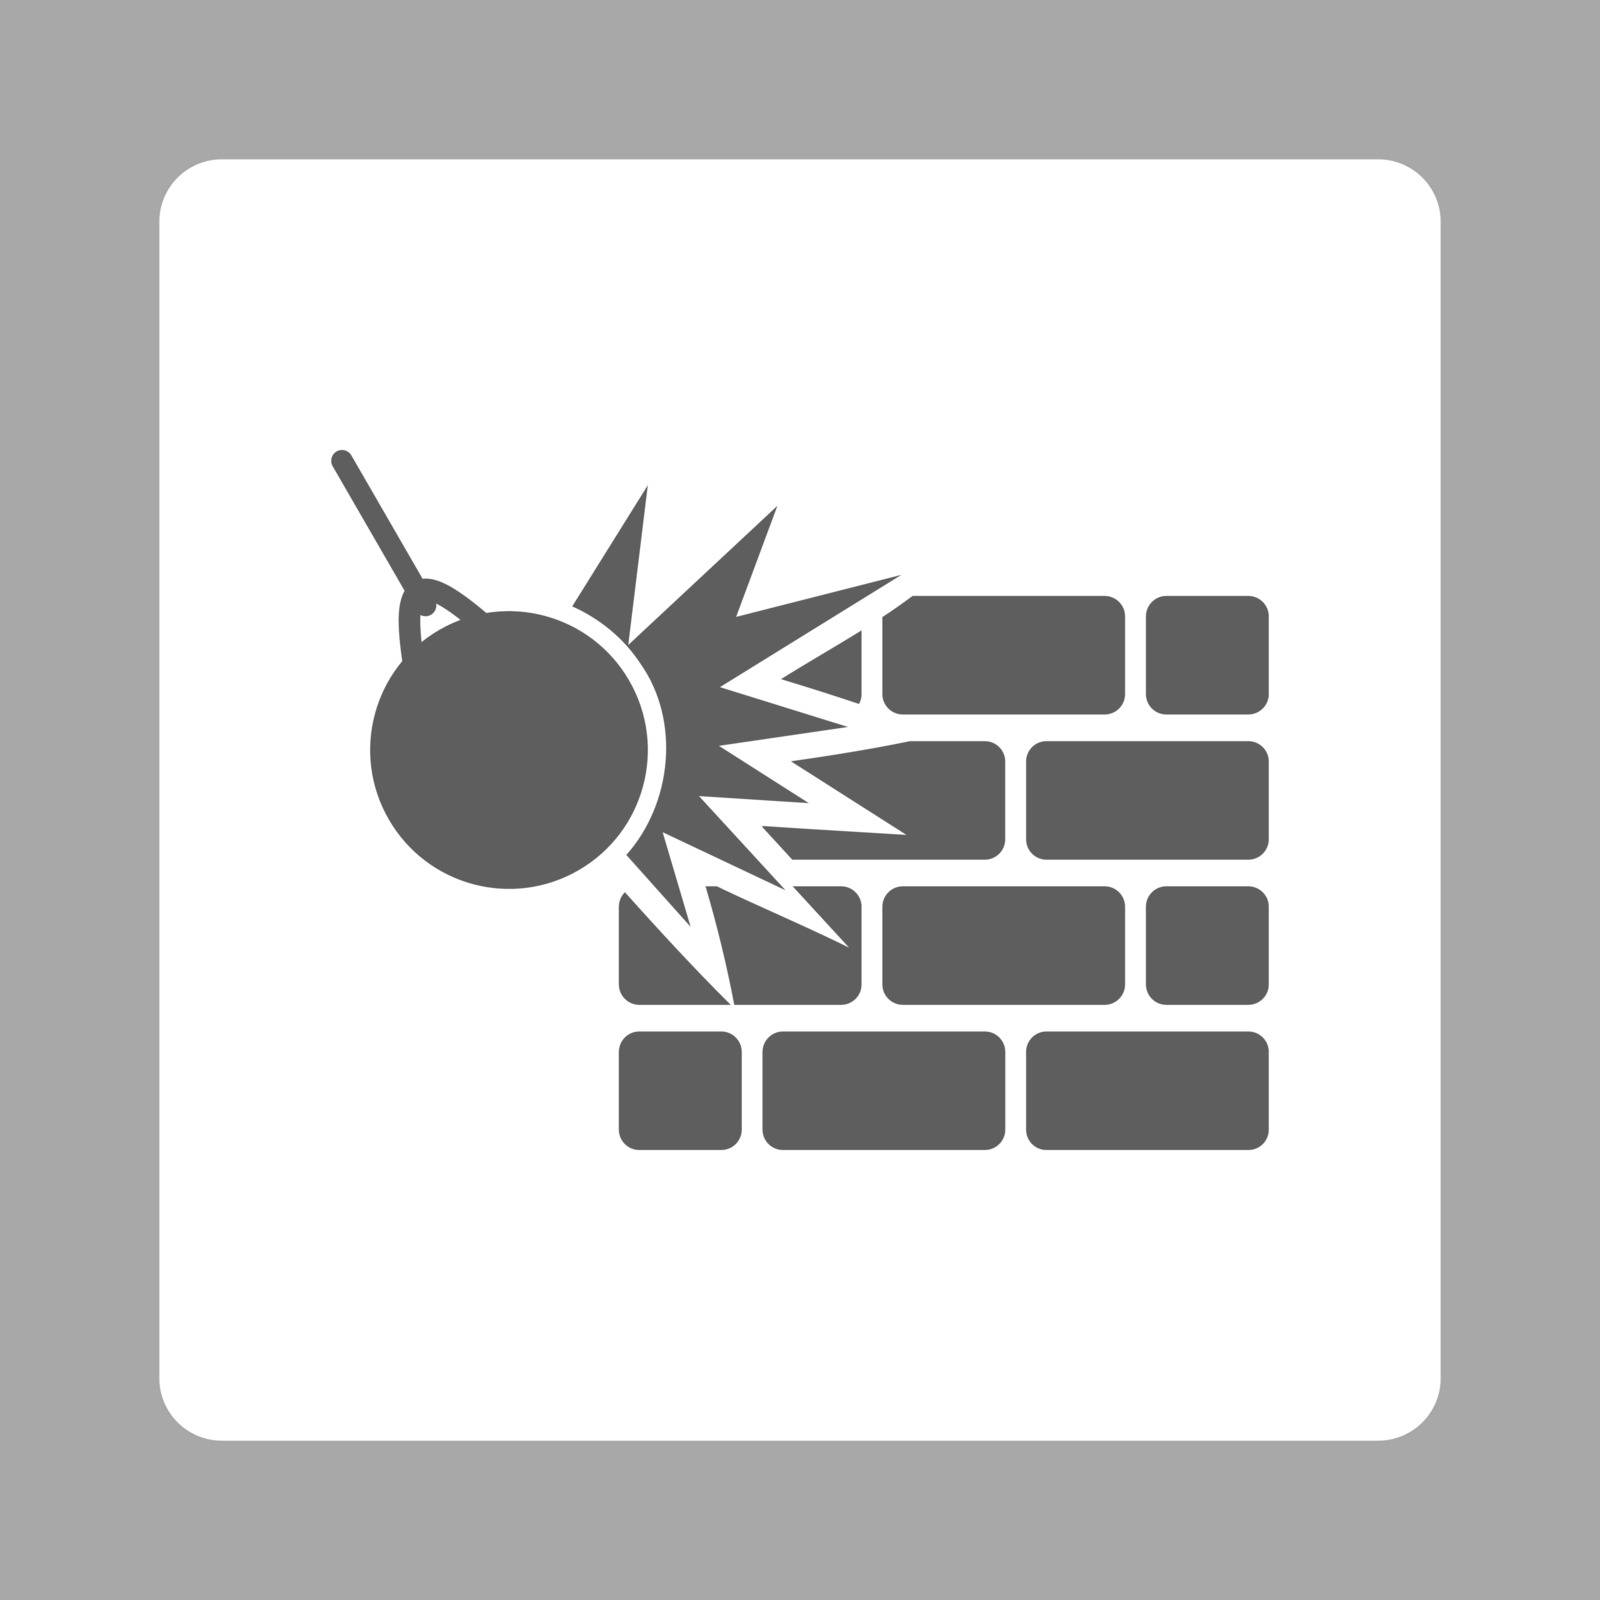 Destruction icon by ahasoft